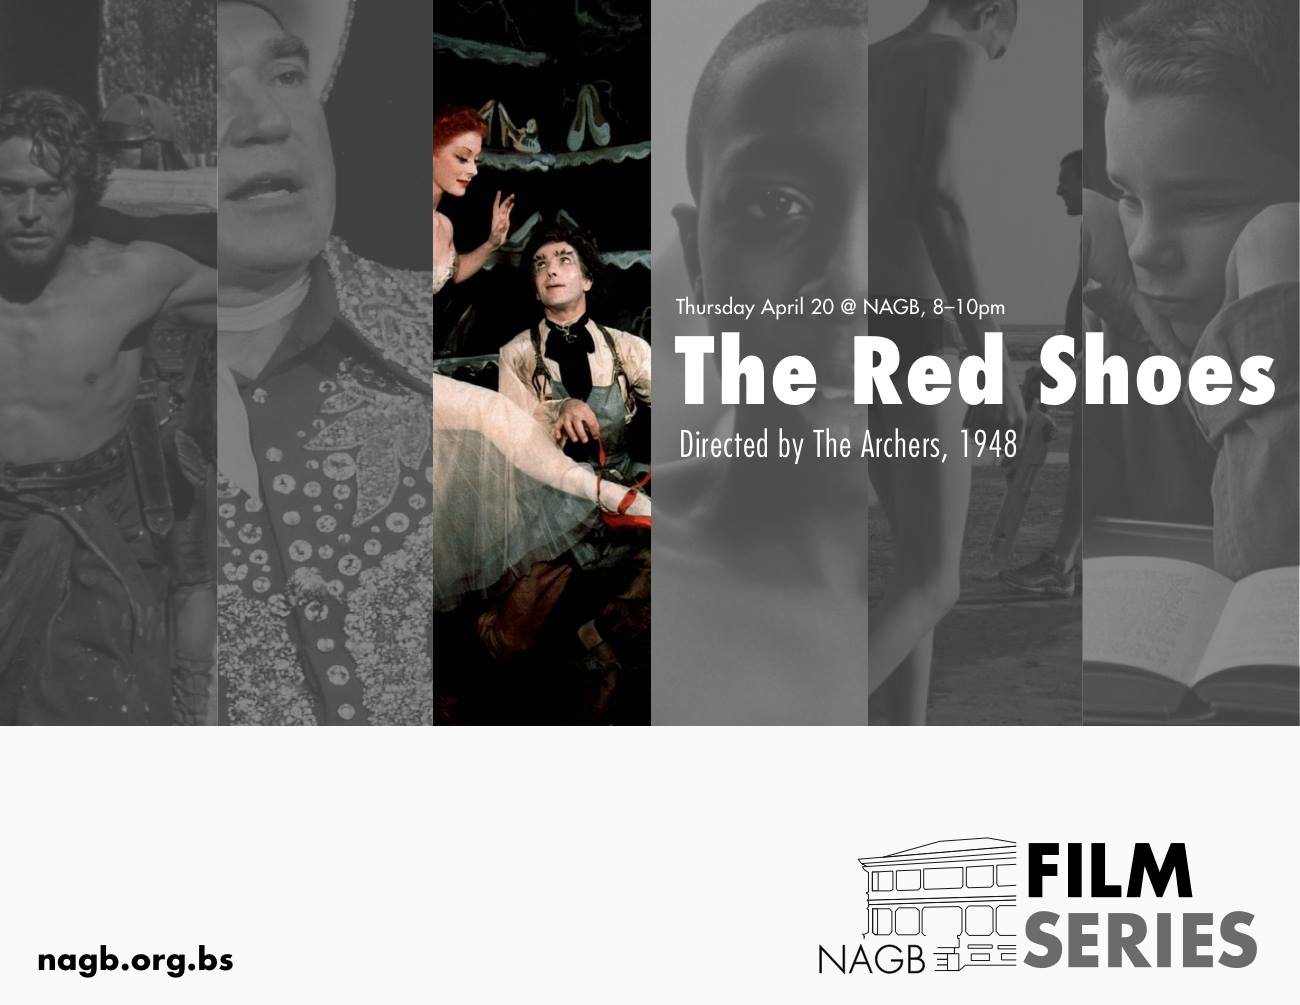 NAGB Film Series presents The Red Shoes